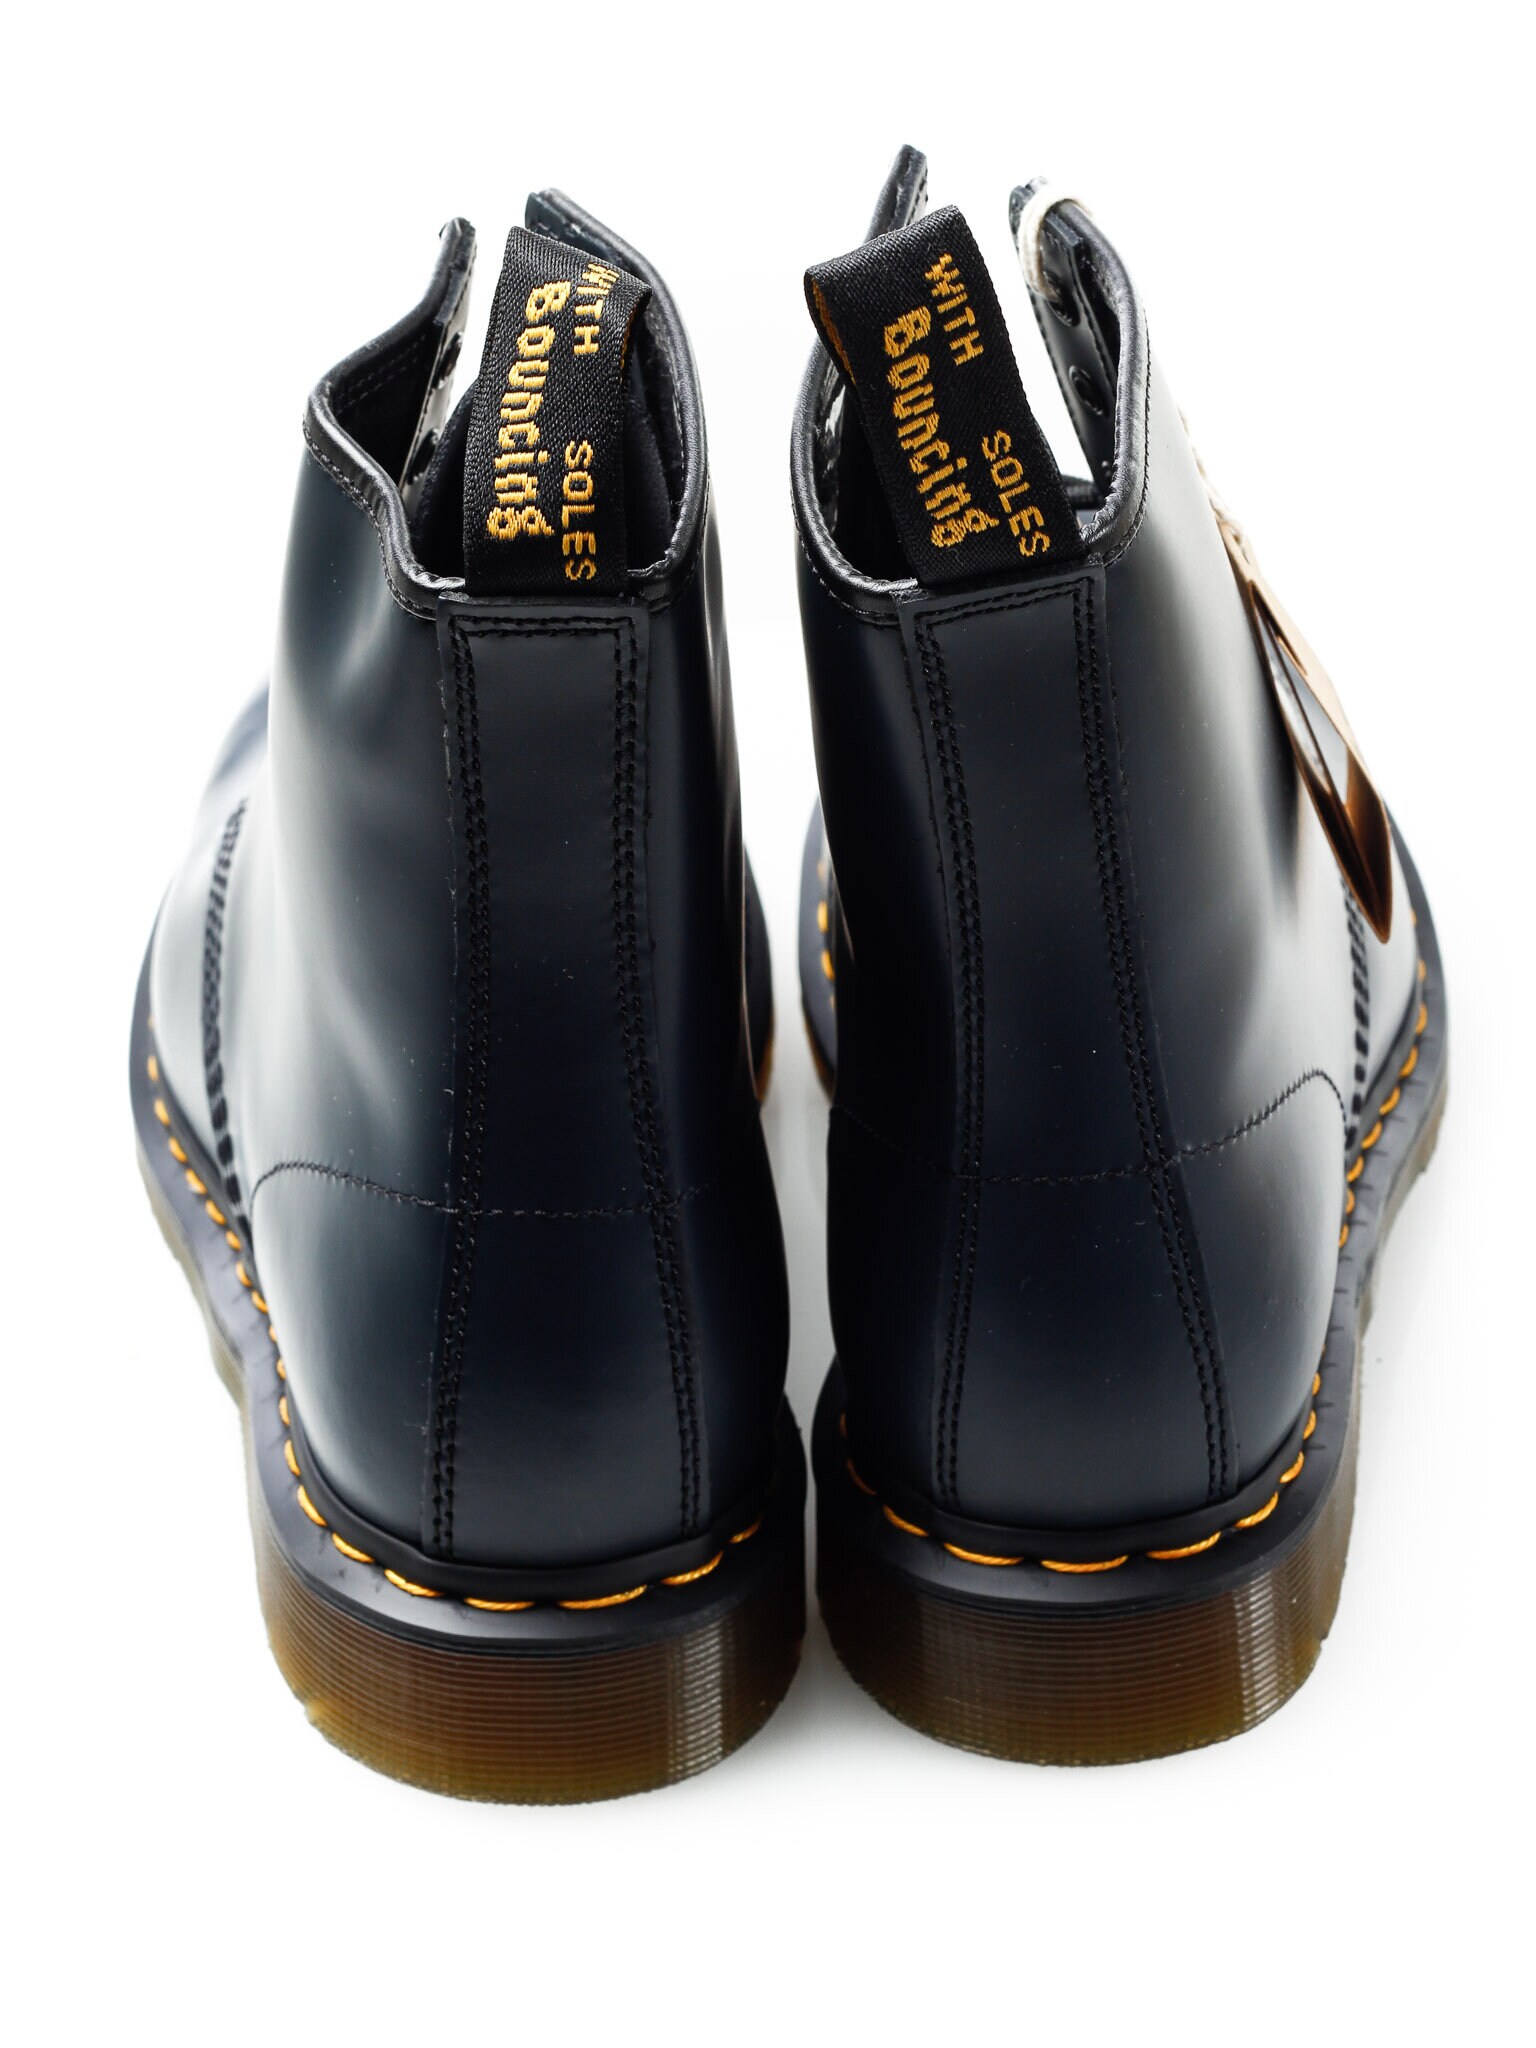 Dr. Martens Boots - Navy